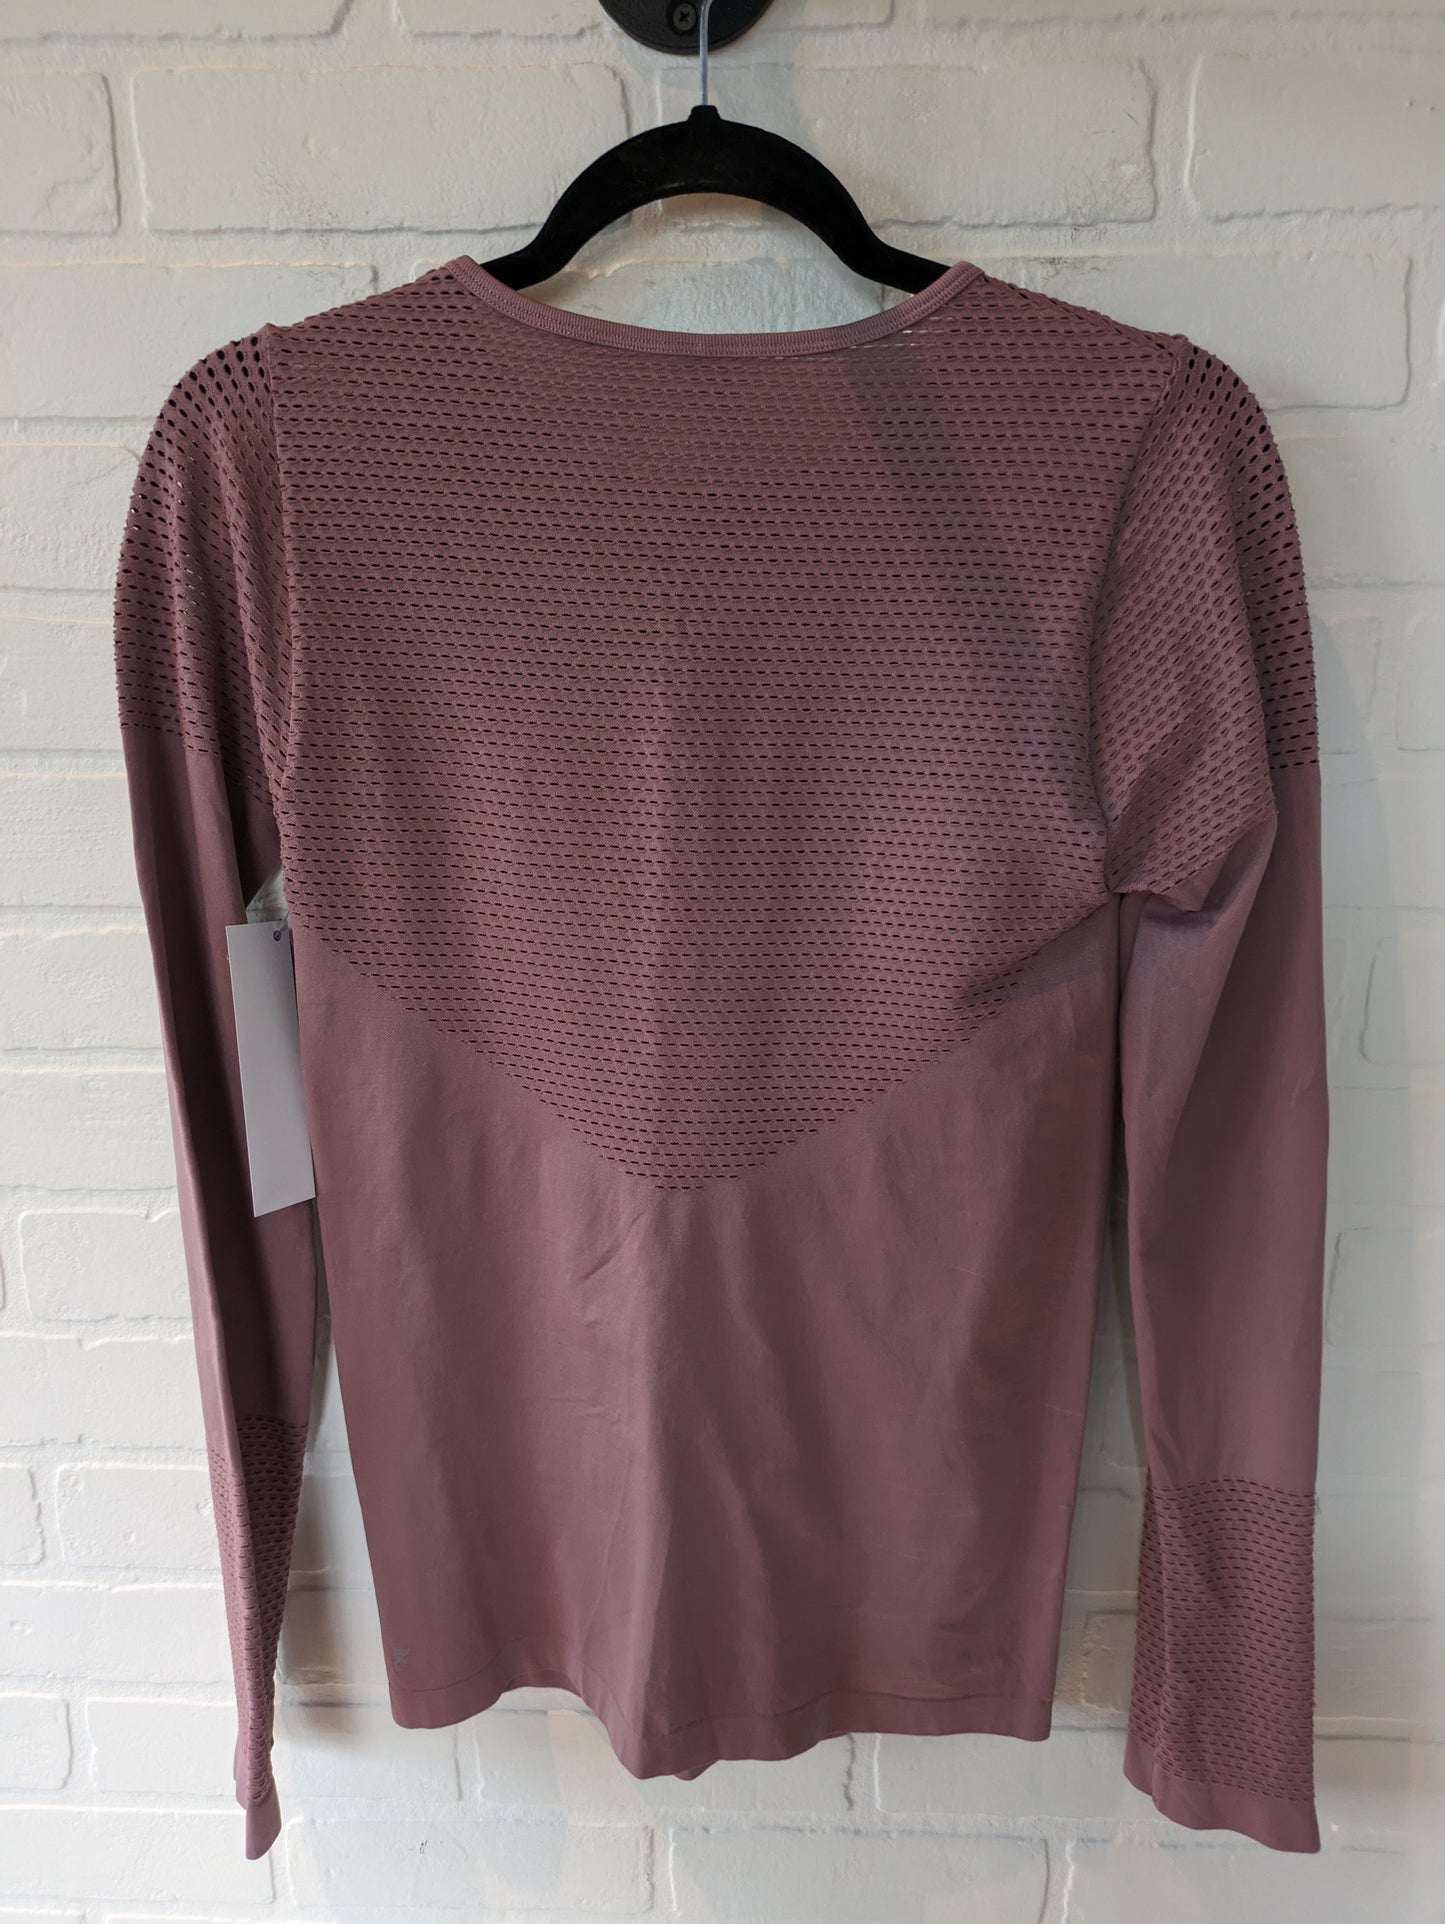 Pink Athletic Top Long Sleeve Crewneck Fabletics, Size M